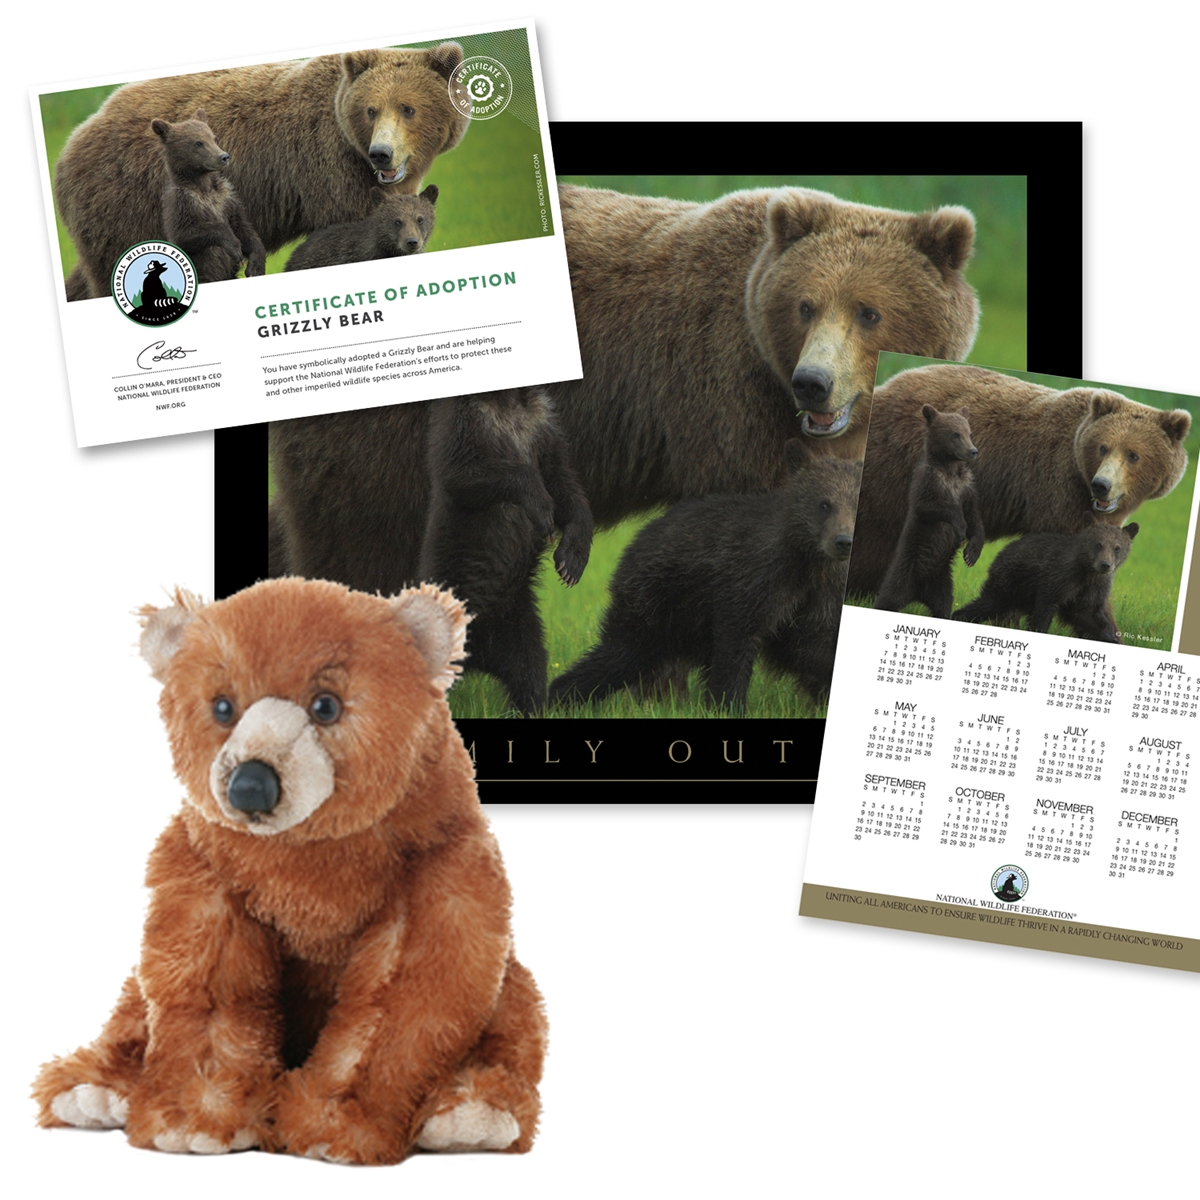 Adopt a Grizzly Bear